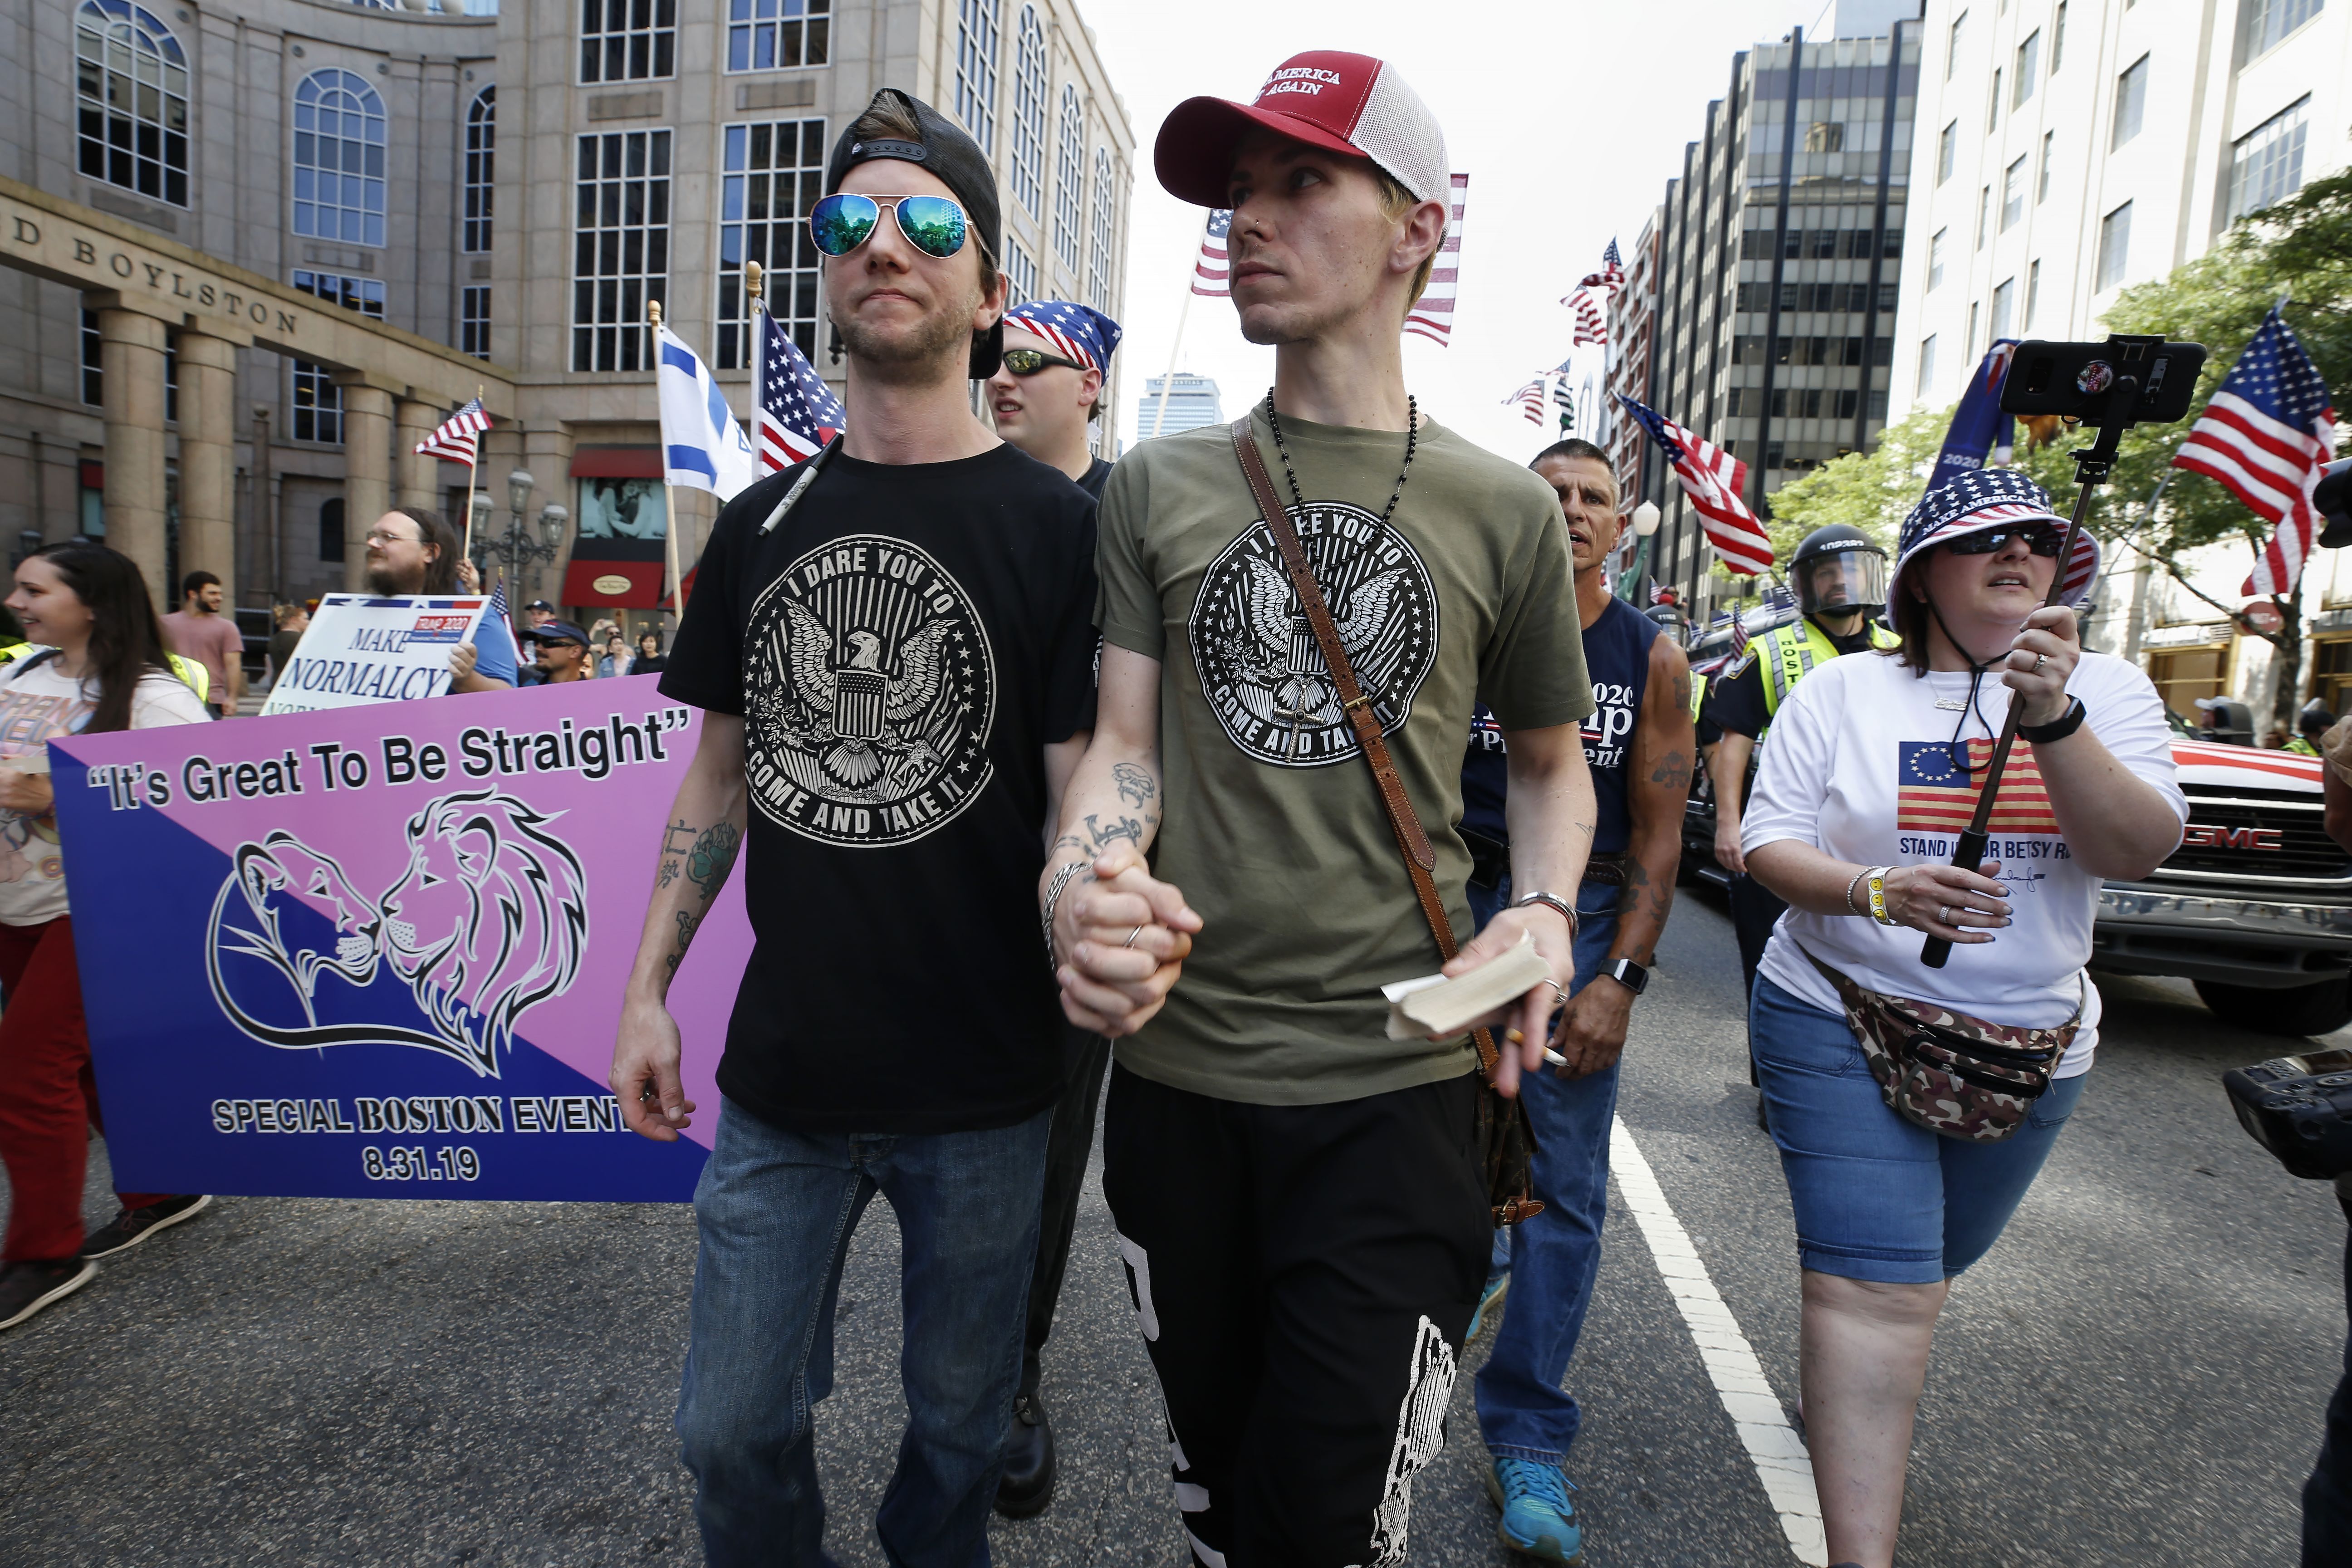 Peter Brown, center left, and Mark Hutt, center right, who said they are engaged to be married, hold hands as they march with others in the Straight Pride Parade in Boston, Saturday, Aug. 31, 2019. (AP Photo/Michael Dwyer)